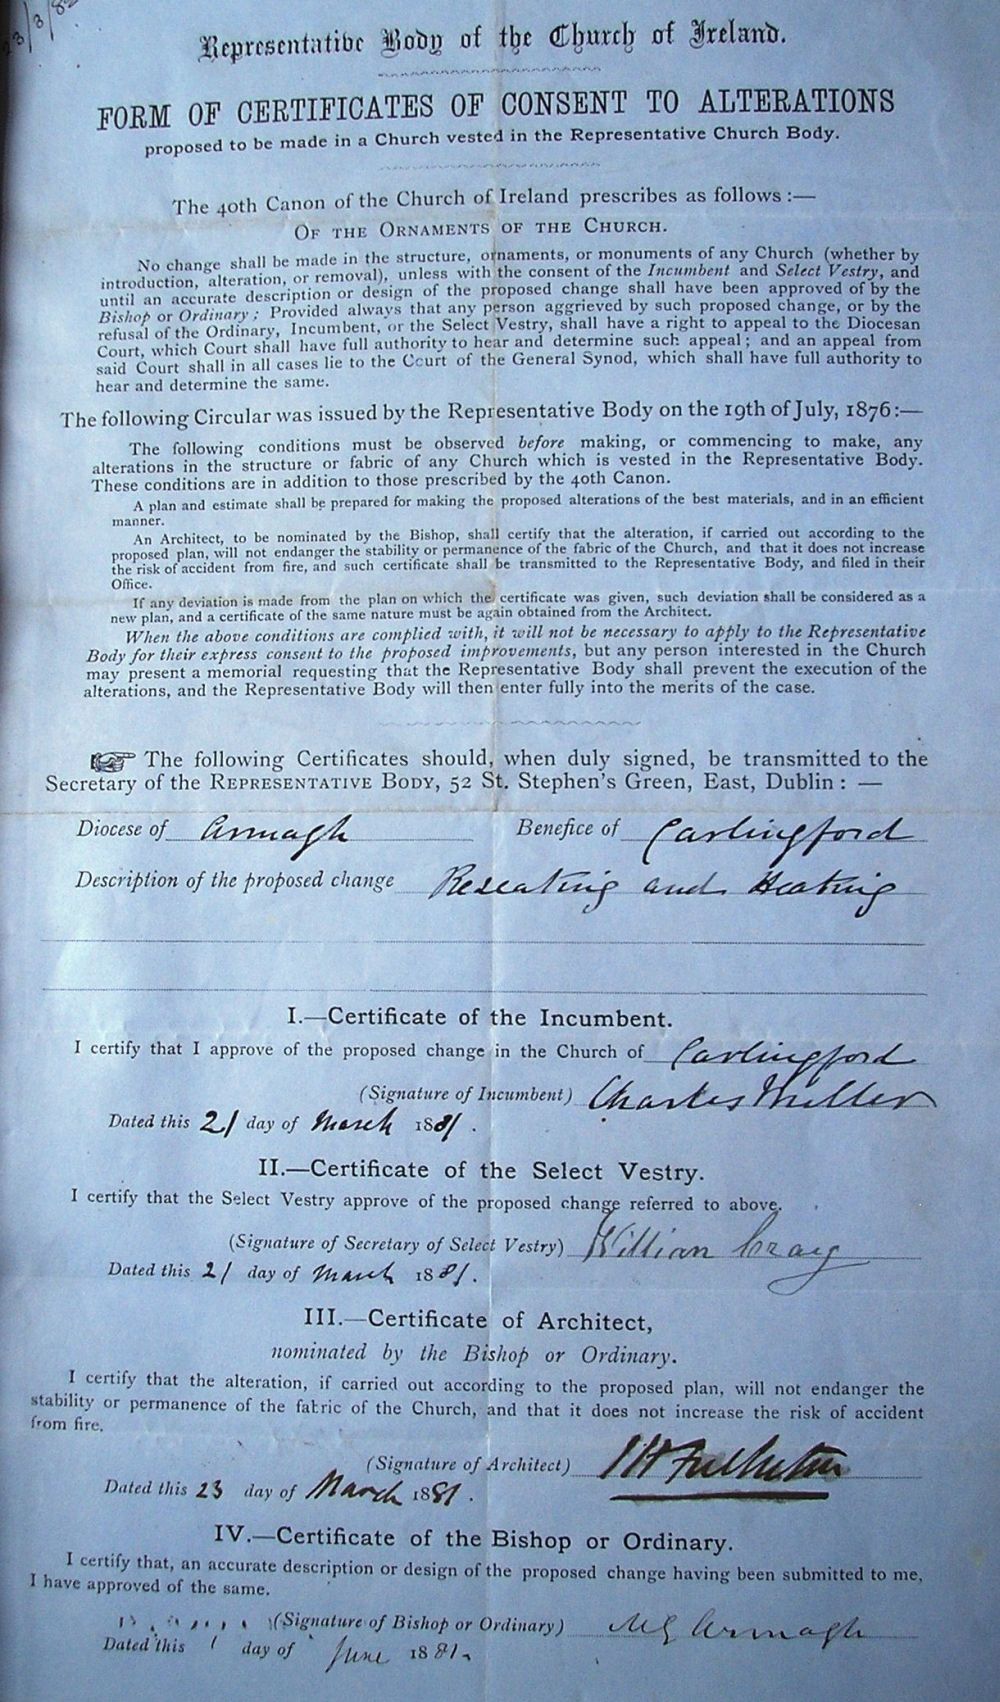 Photograph of the consents form